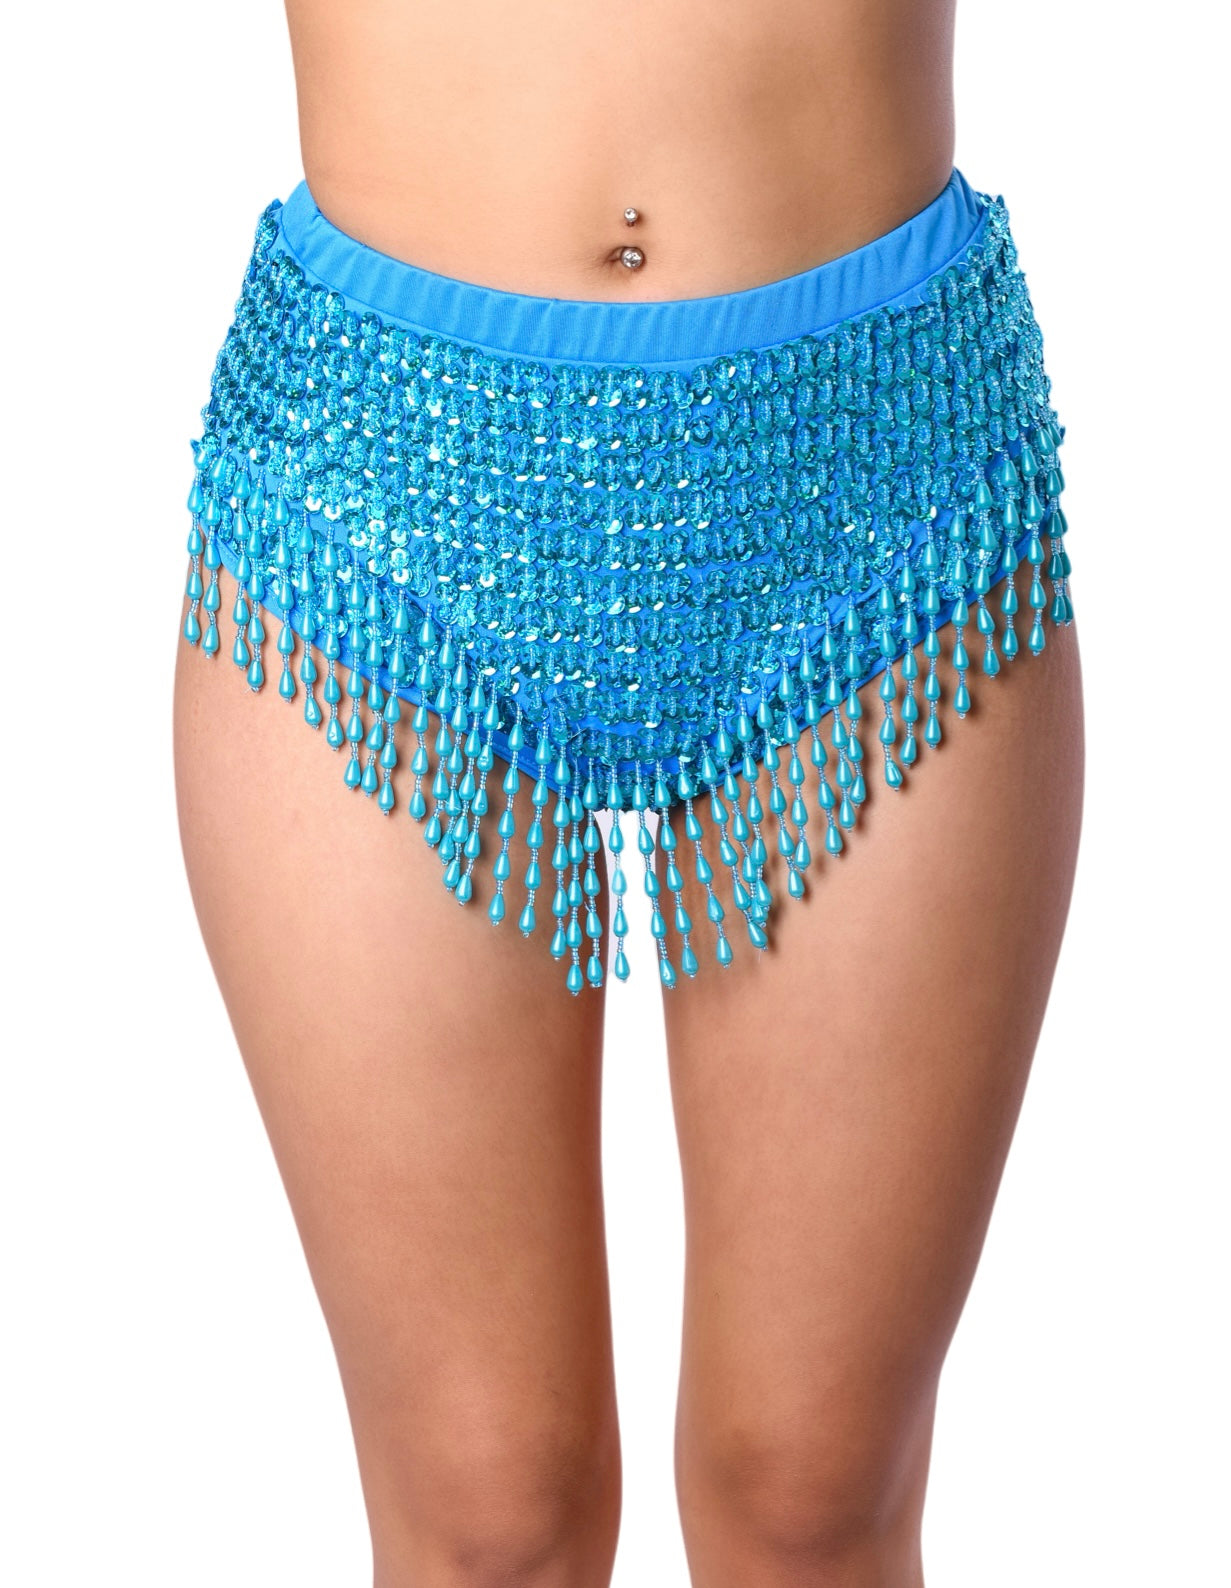 Hand Stitched Sequin High Waisted Bottom- Pixie Blue